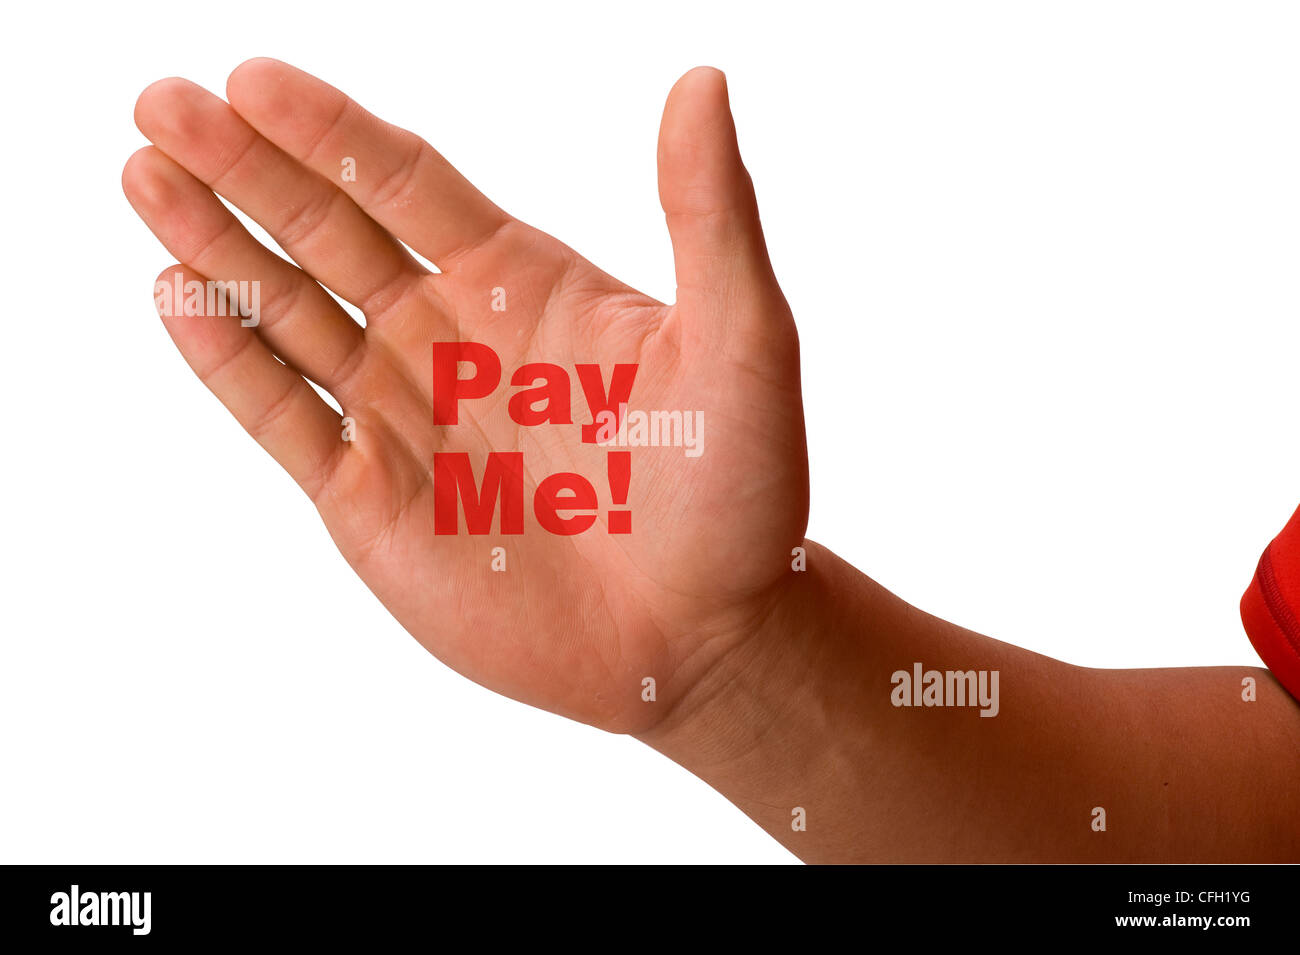 Pay me says the hand. Stock Photo